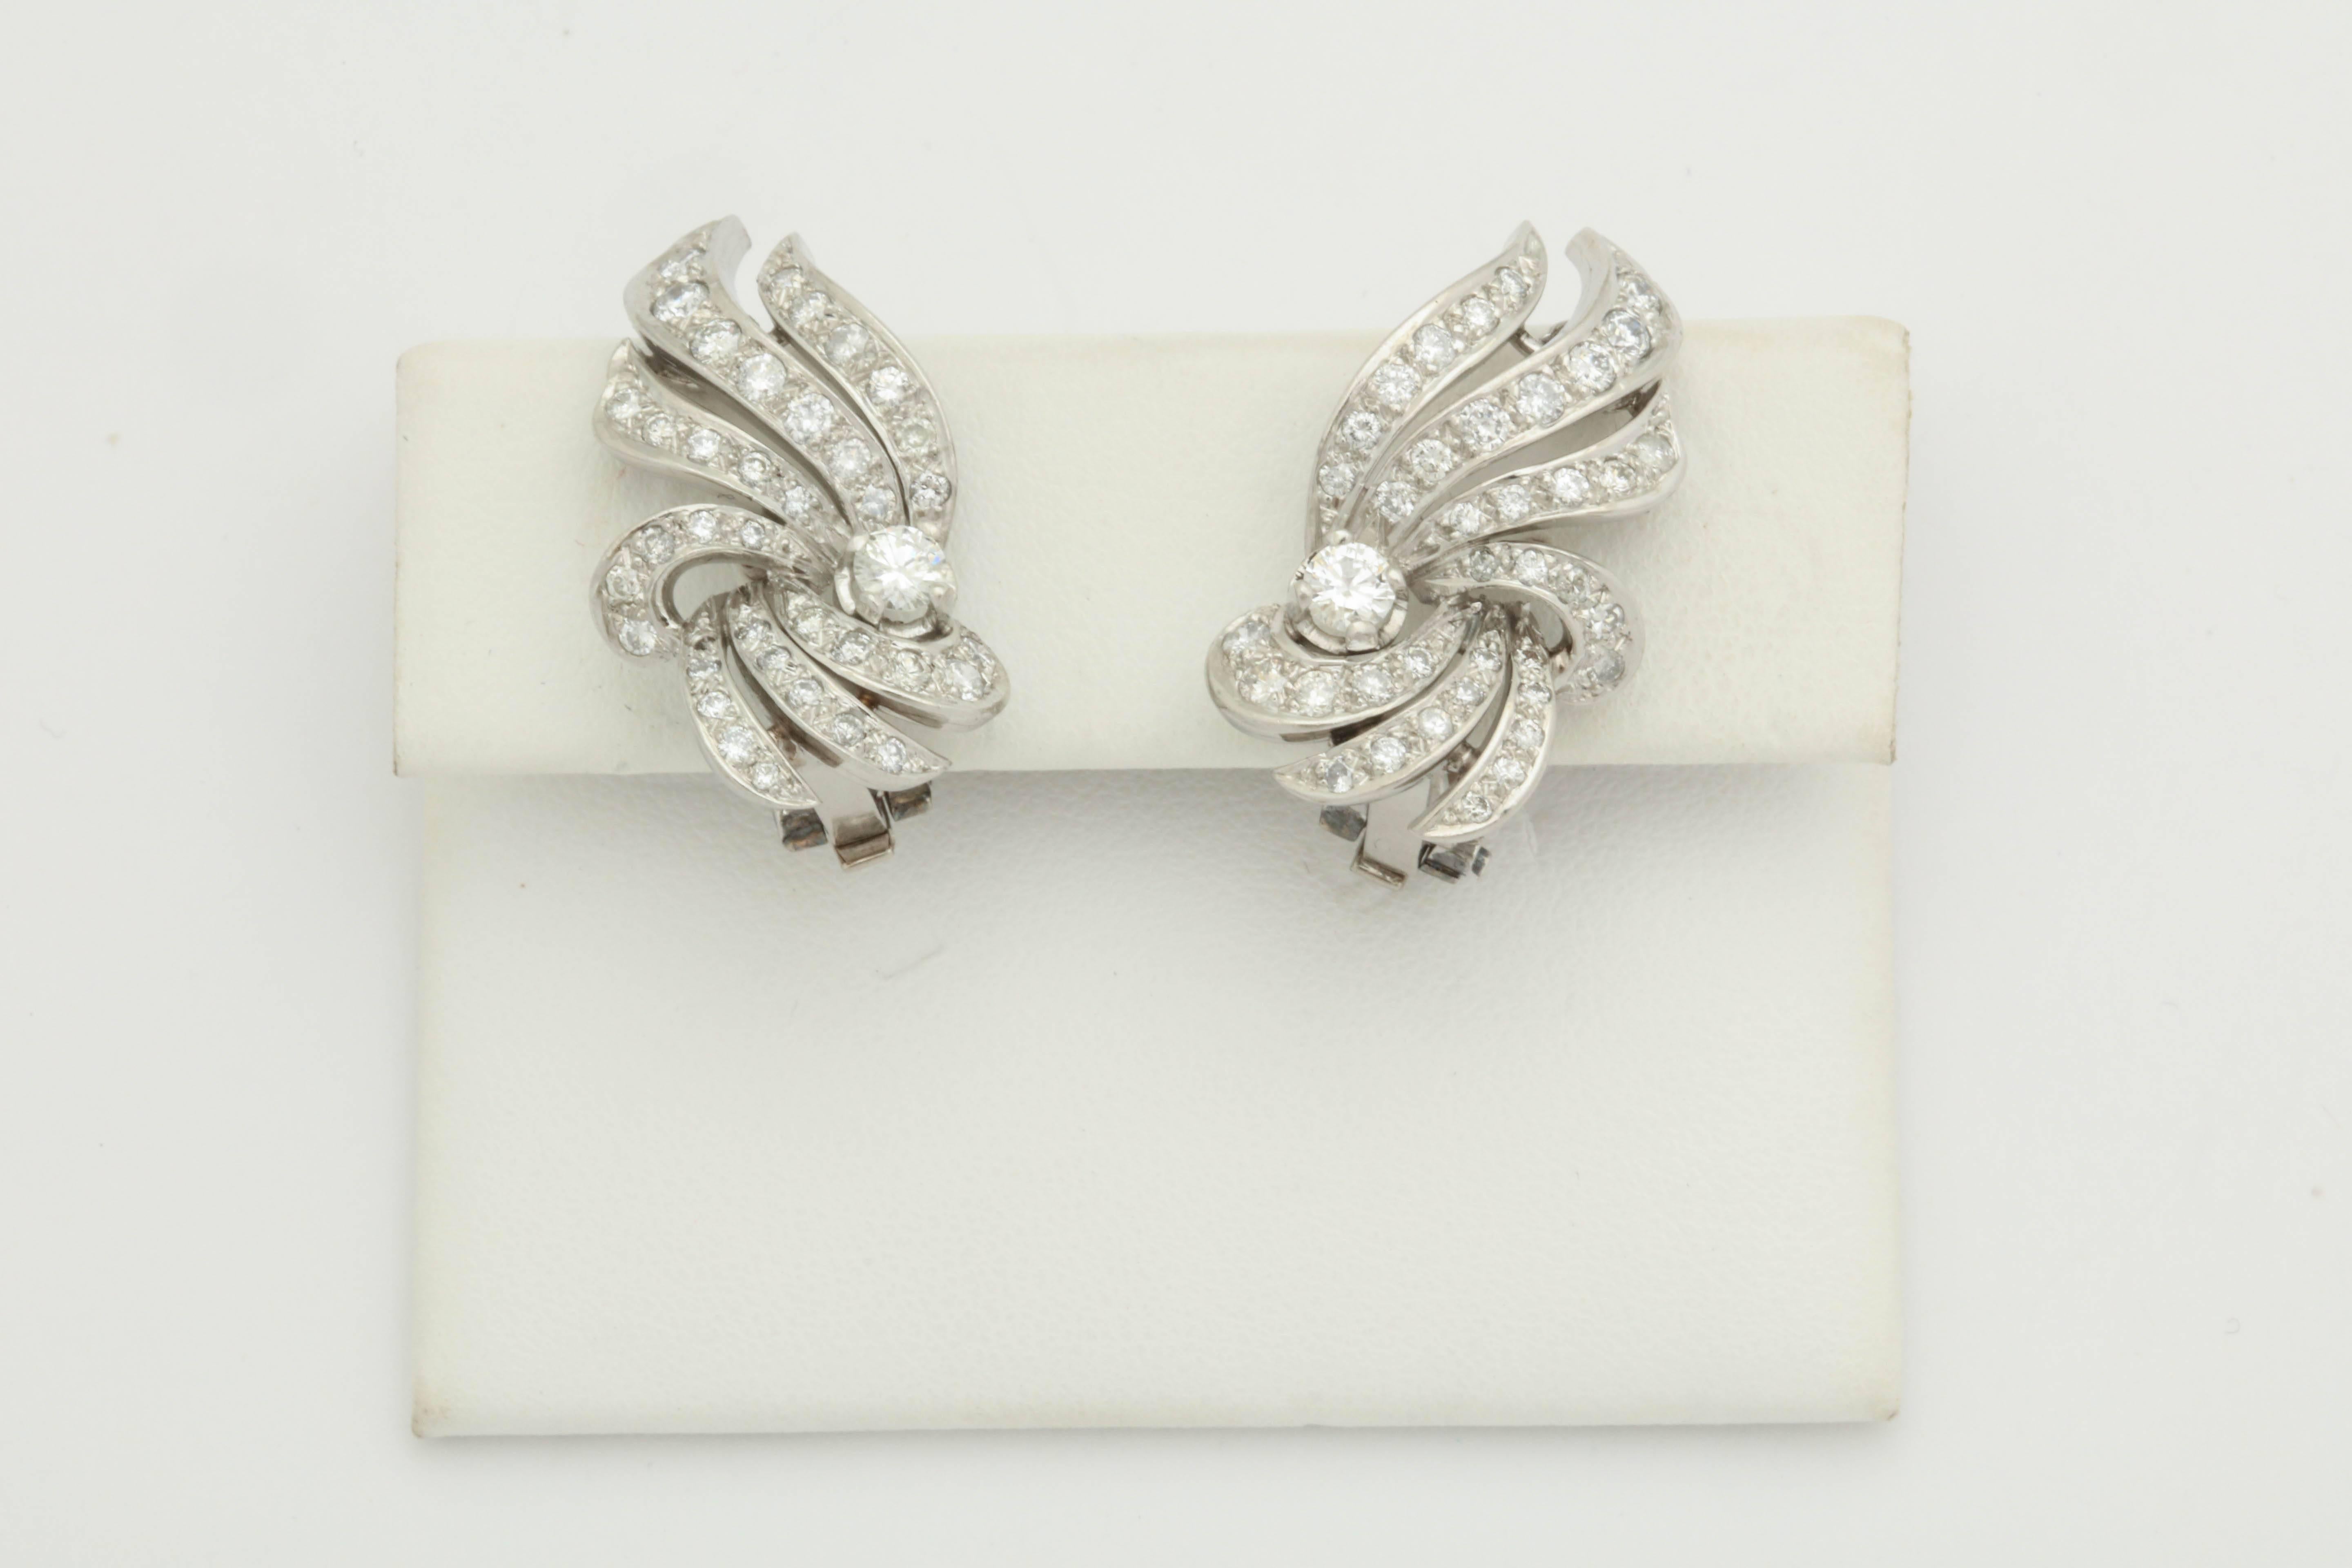 One Pair Of Ladies Flame And Wing Design Earclips With Posts Encrusted With Approximately Two Carats Of diamonds. Made In America In The 1950's.